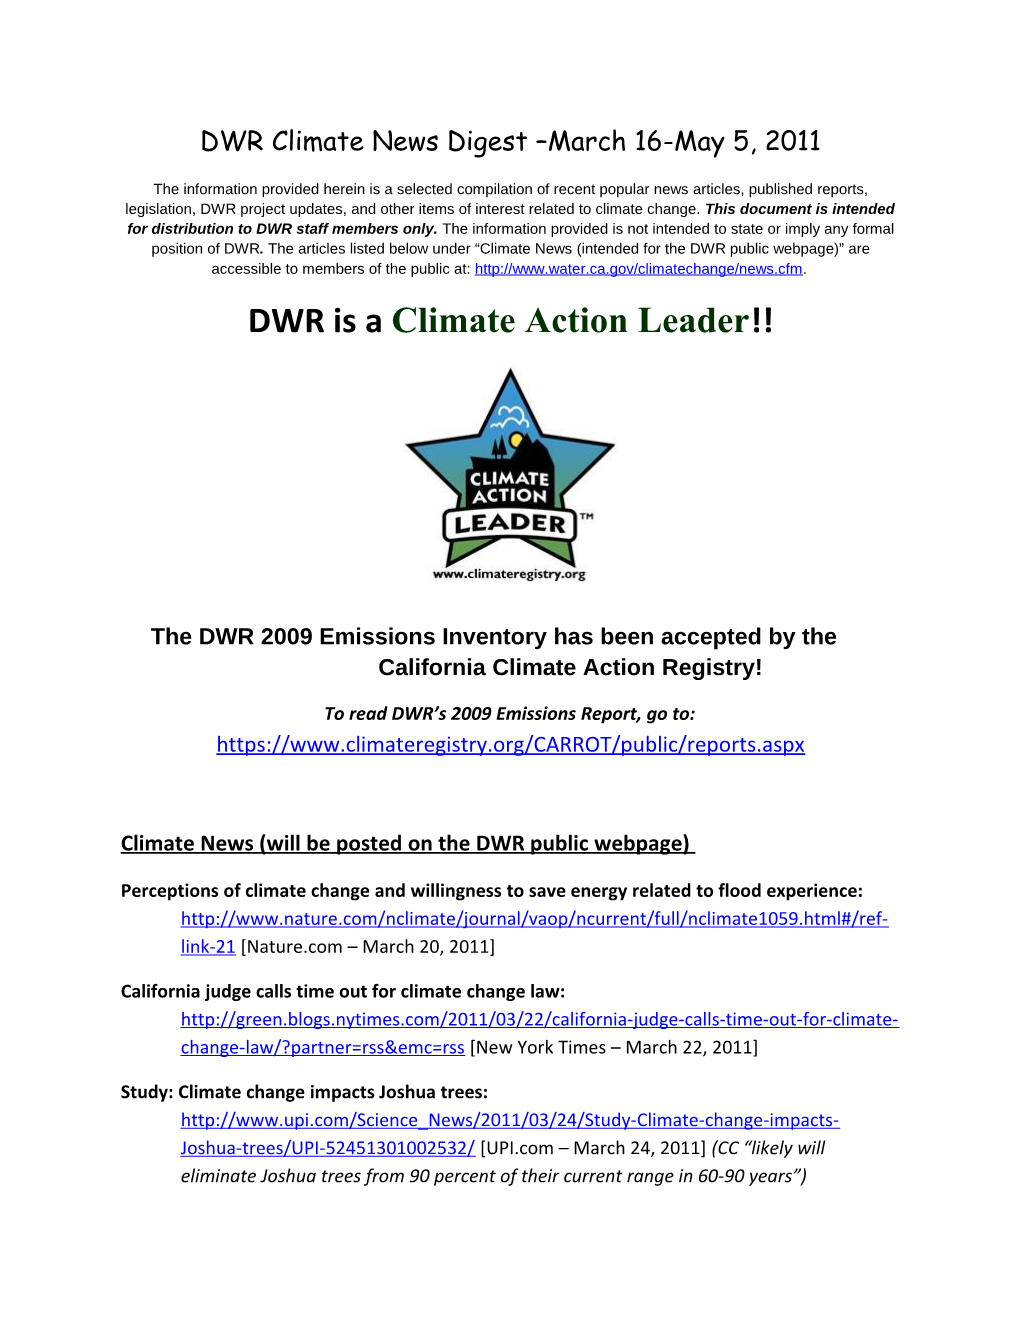 DWR Is a Climate Action Leader